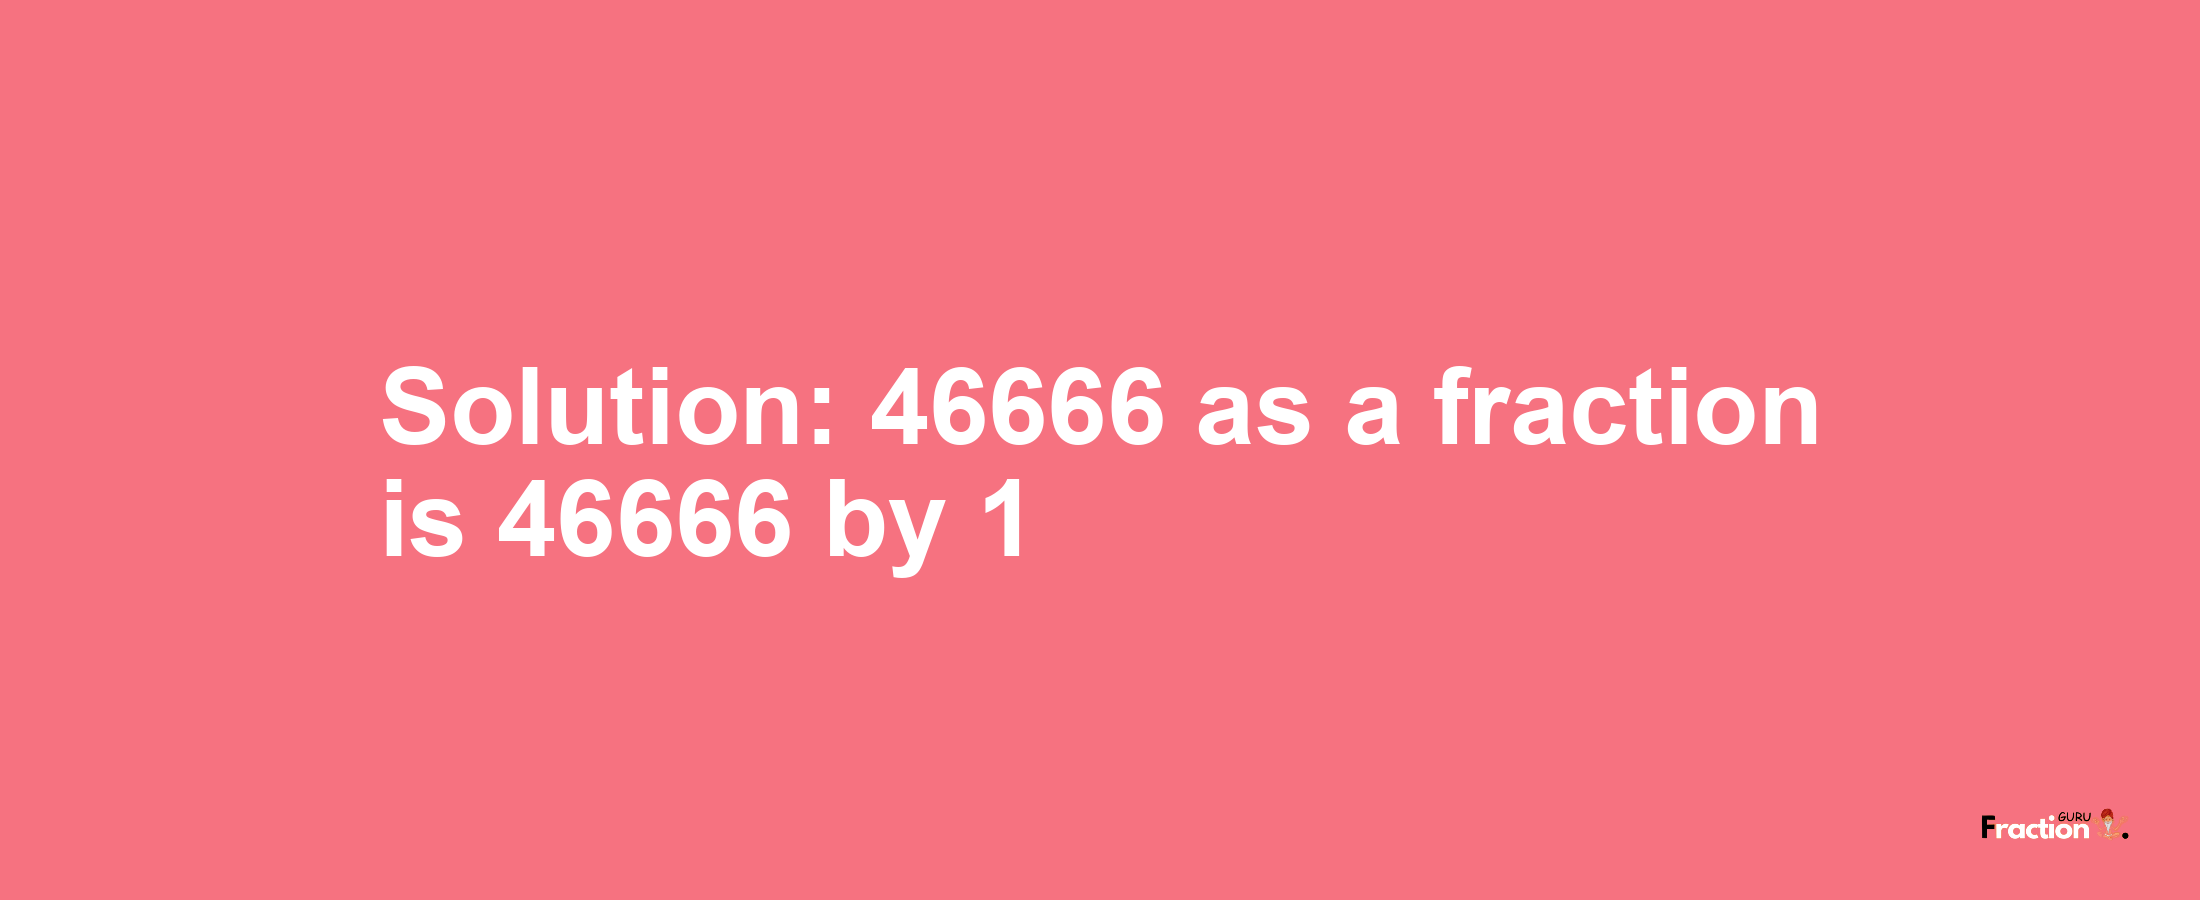 Solution:46666 as a fraction is 46666/1